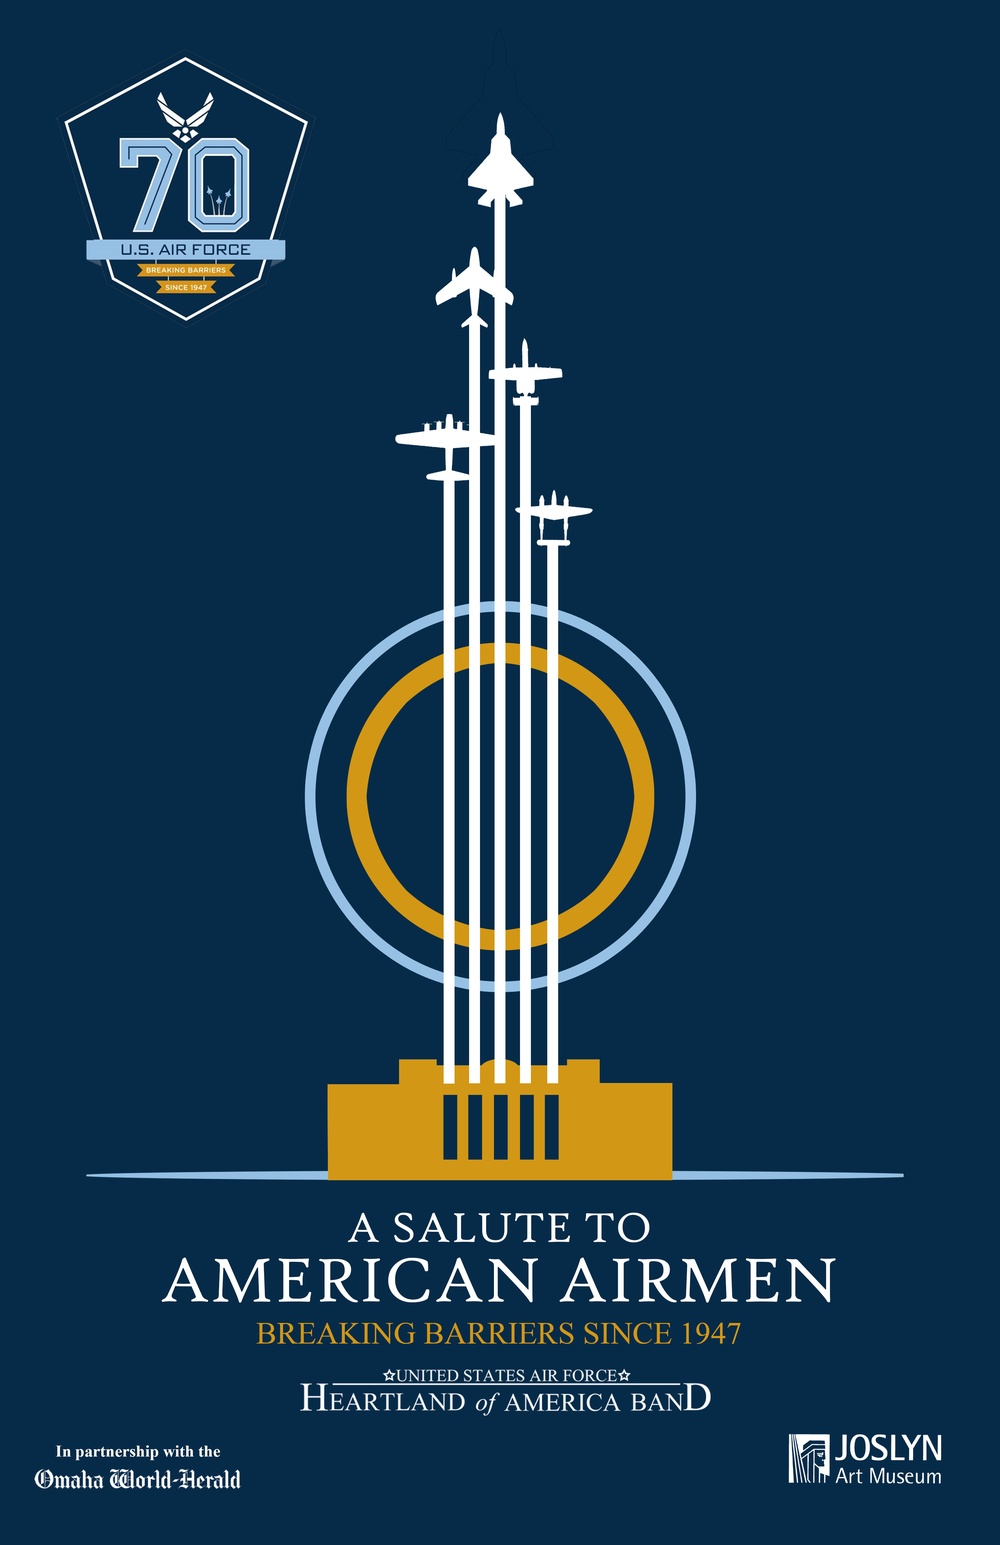 Air Force 70th Anniversary Concert Poster